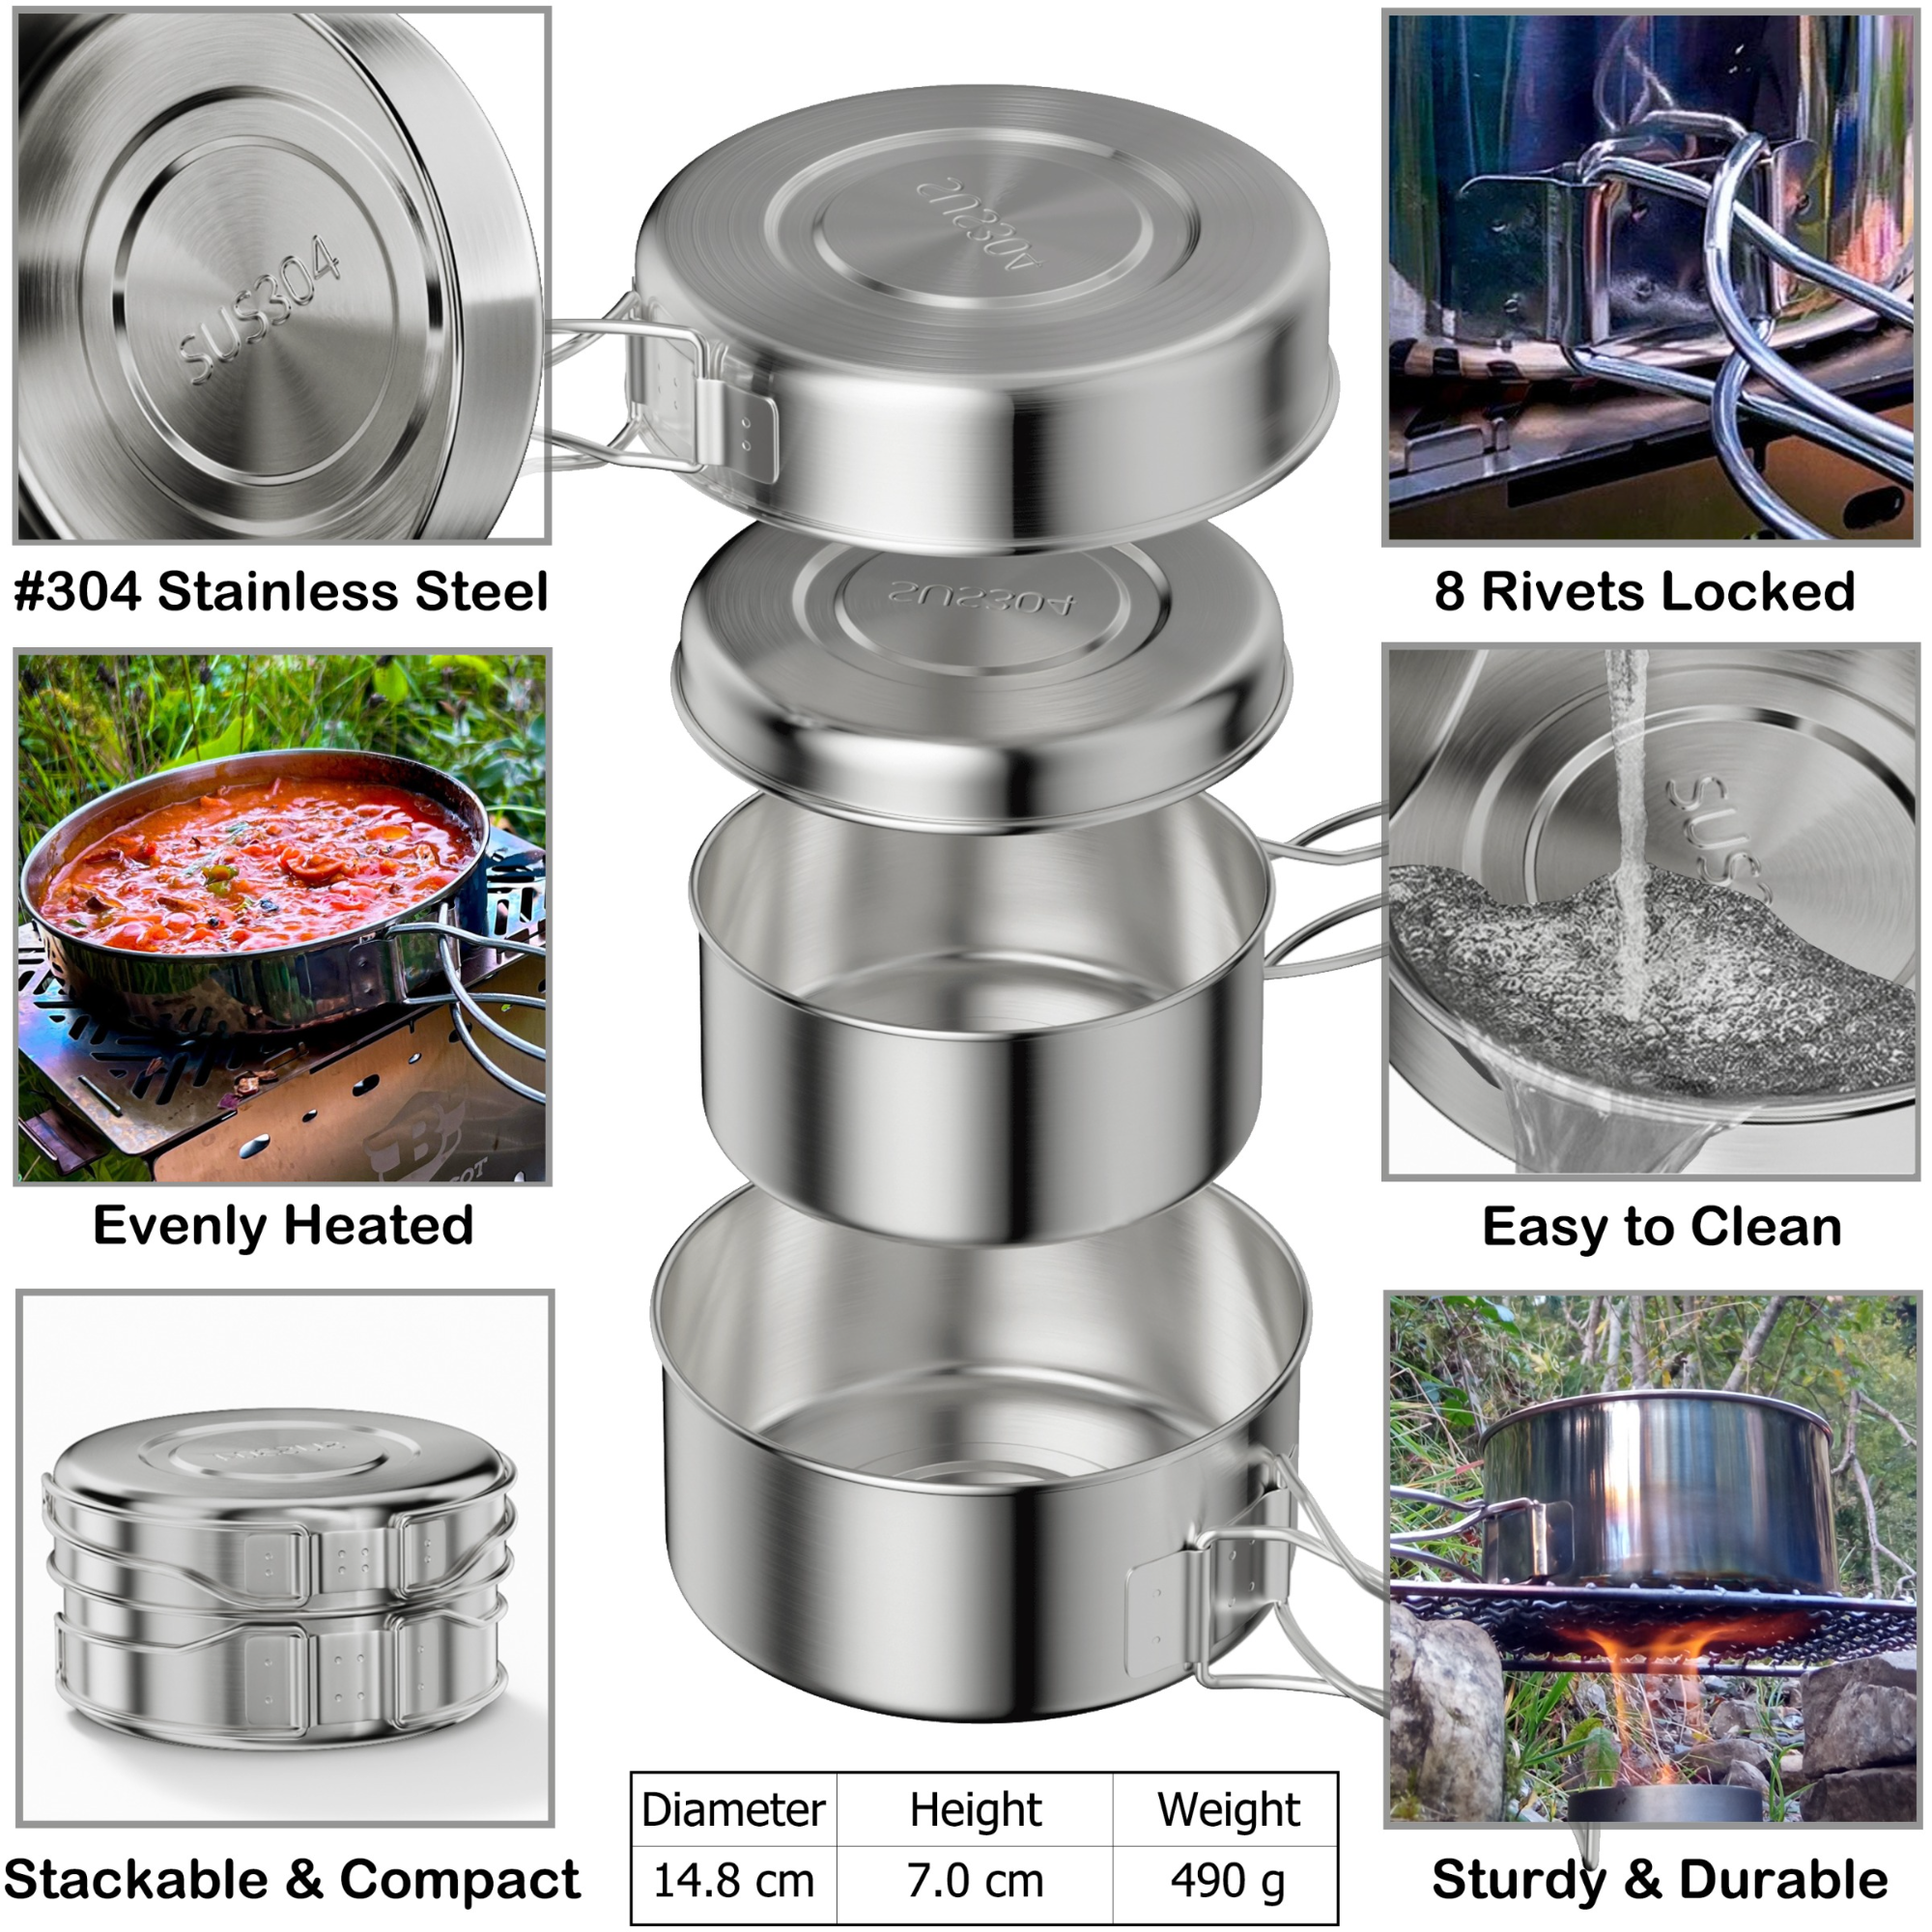 NEW! Camping Cookware Set 304 Stainless Steel 8-Piece Pots & Pans - Wealers